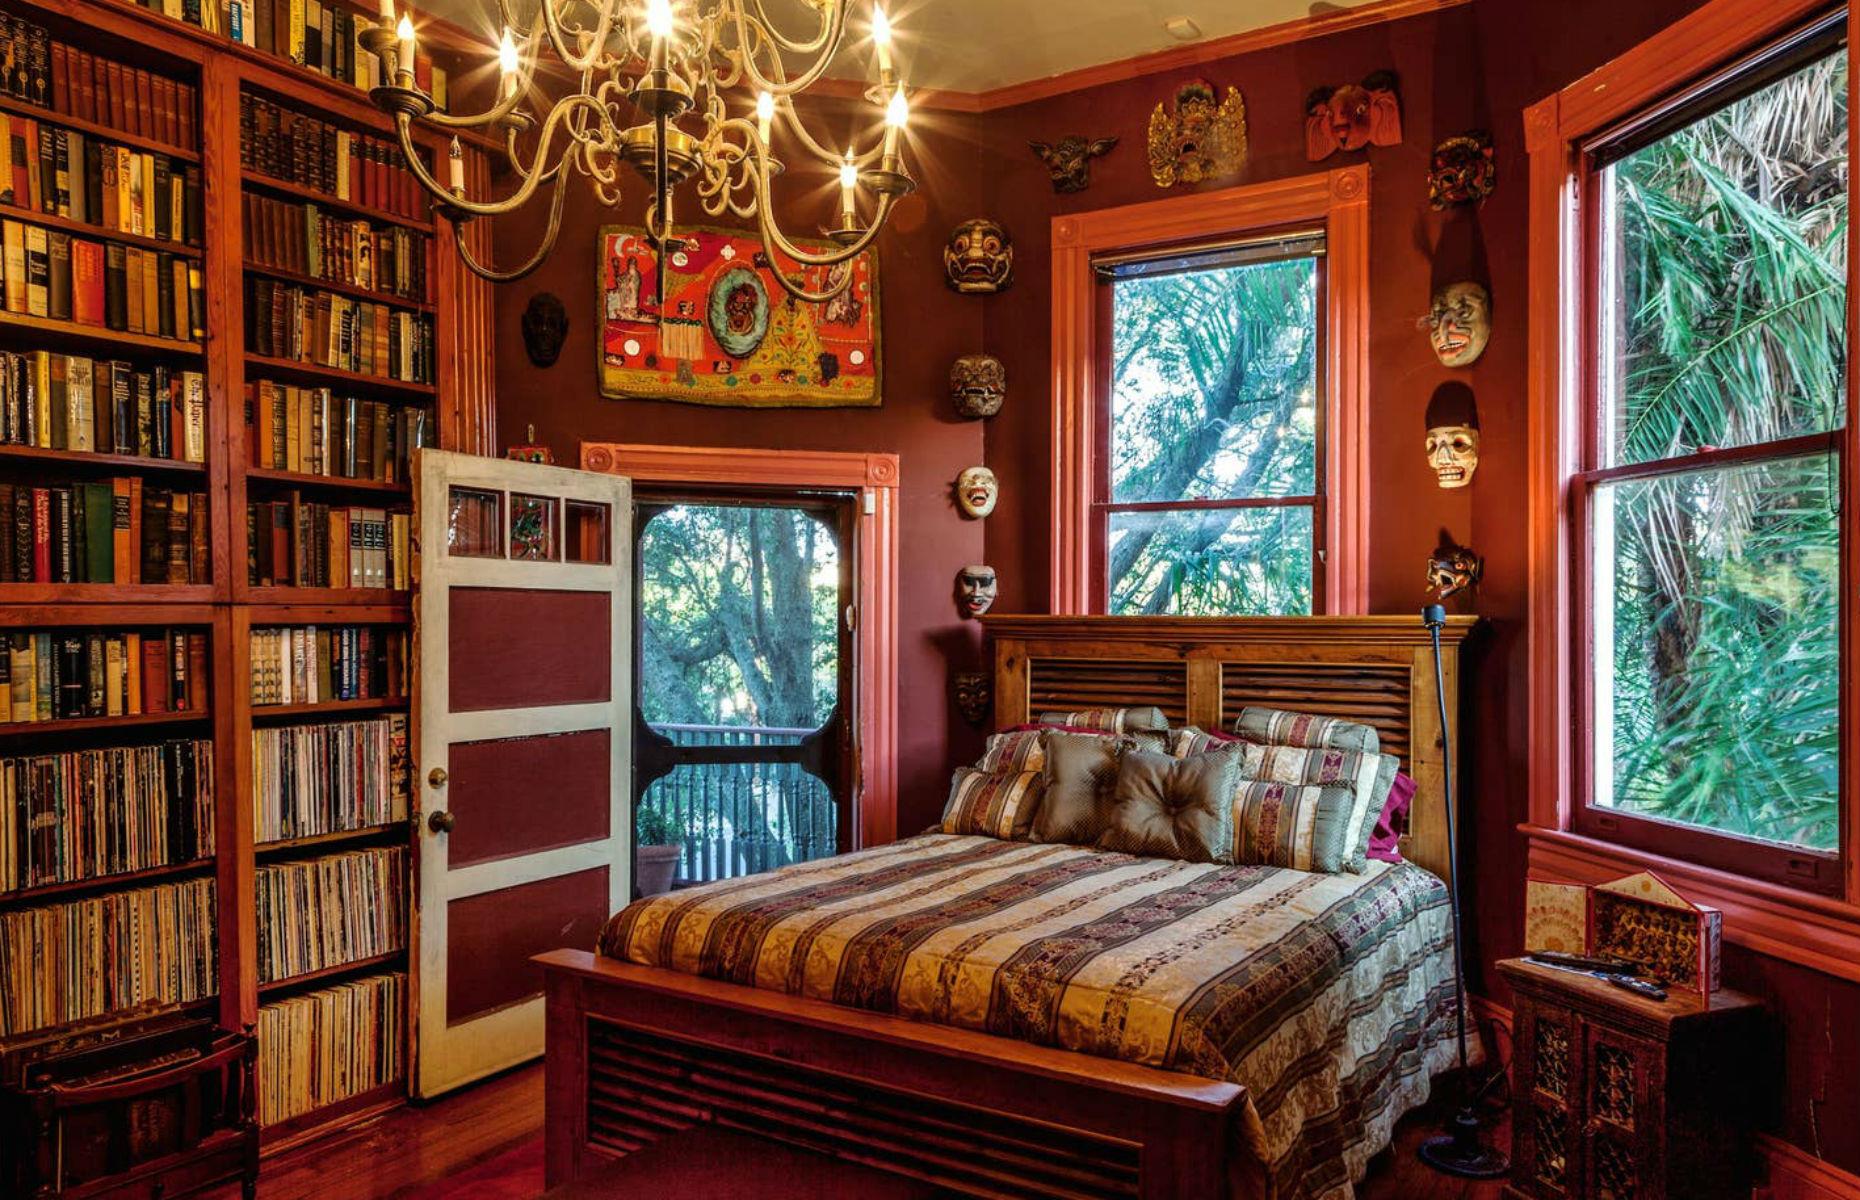 <p>You'd be forgiven for thinking you'd booked into a library when you set foot in this <a href="https://www.airbnb.co.uk/rooms/914617?source_impression_id=p3_1572607474_yvspvKt%2FTdcxxf%2BM">quirky room</a> at the top of the Parks-Bowman mansion in the heart of the Garden District. Featuring a grand, antique cypress queen-size bed, 60-inch TV, mini-fridge, private marble bathroom and balcony, this book lovers' paradise is an exercise in luxury. It sleeps two people from $95 a night.</p>  <p><strong><a href="https://www.loveexploring.com/guides/74898/explore-new-orleans-the-top-things-to-do-where-to-stay-what-to-eat">Discover what to see in the Big Easy with our city guide</a></strong></p>